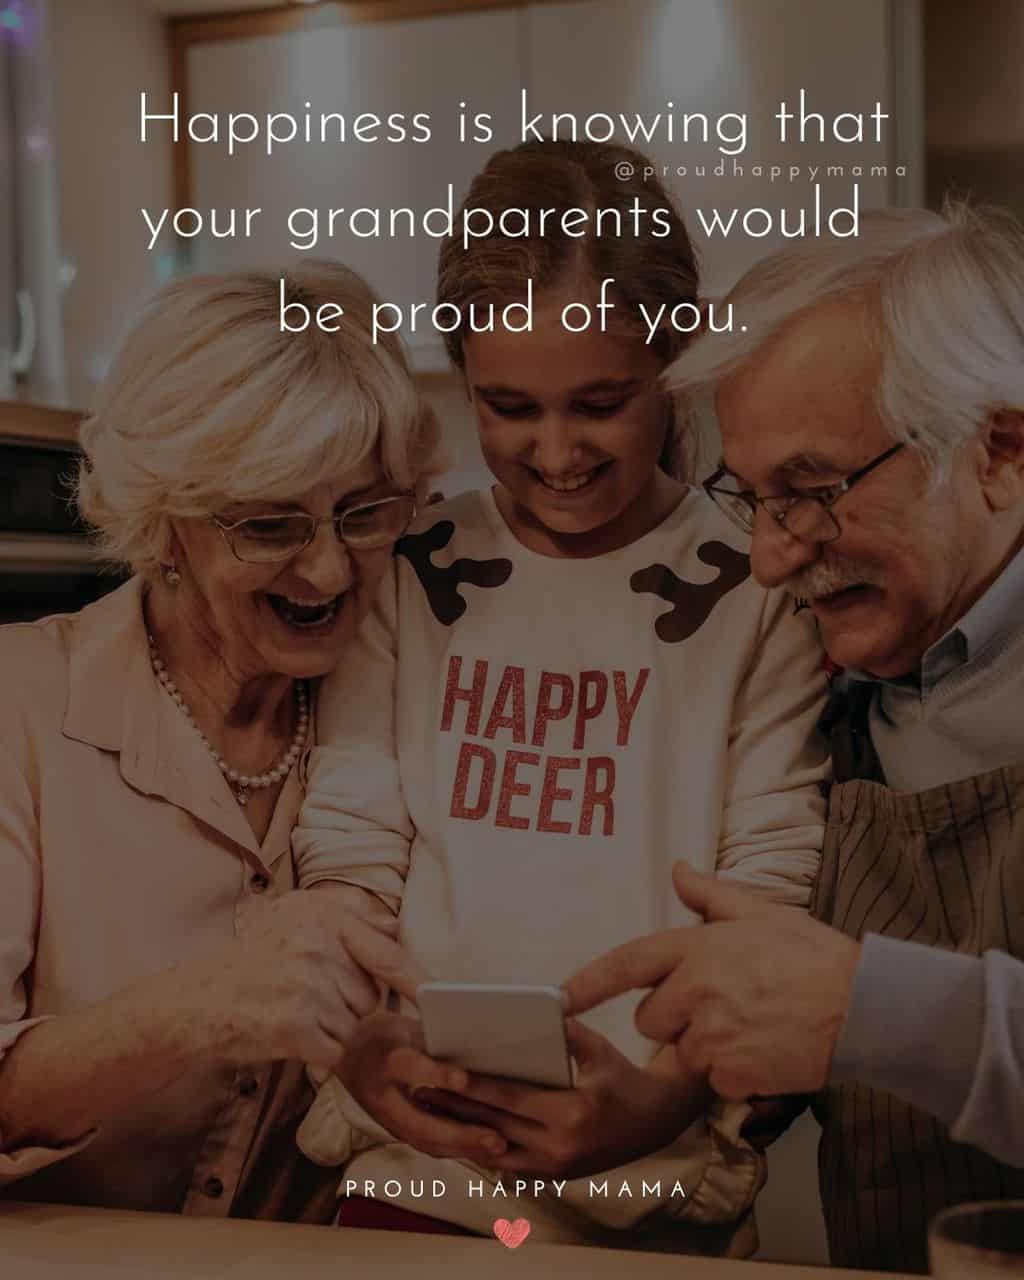 Grandparent Quotes – Happiness is knowing that your grandparents would be proud of you.’